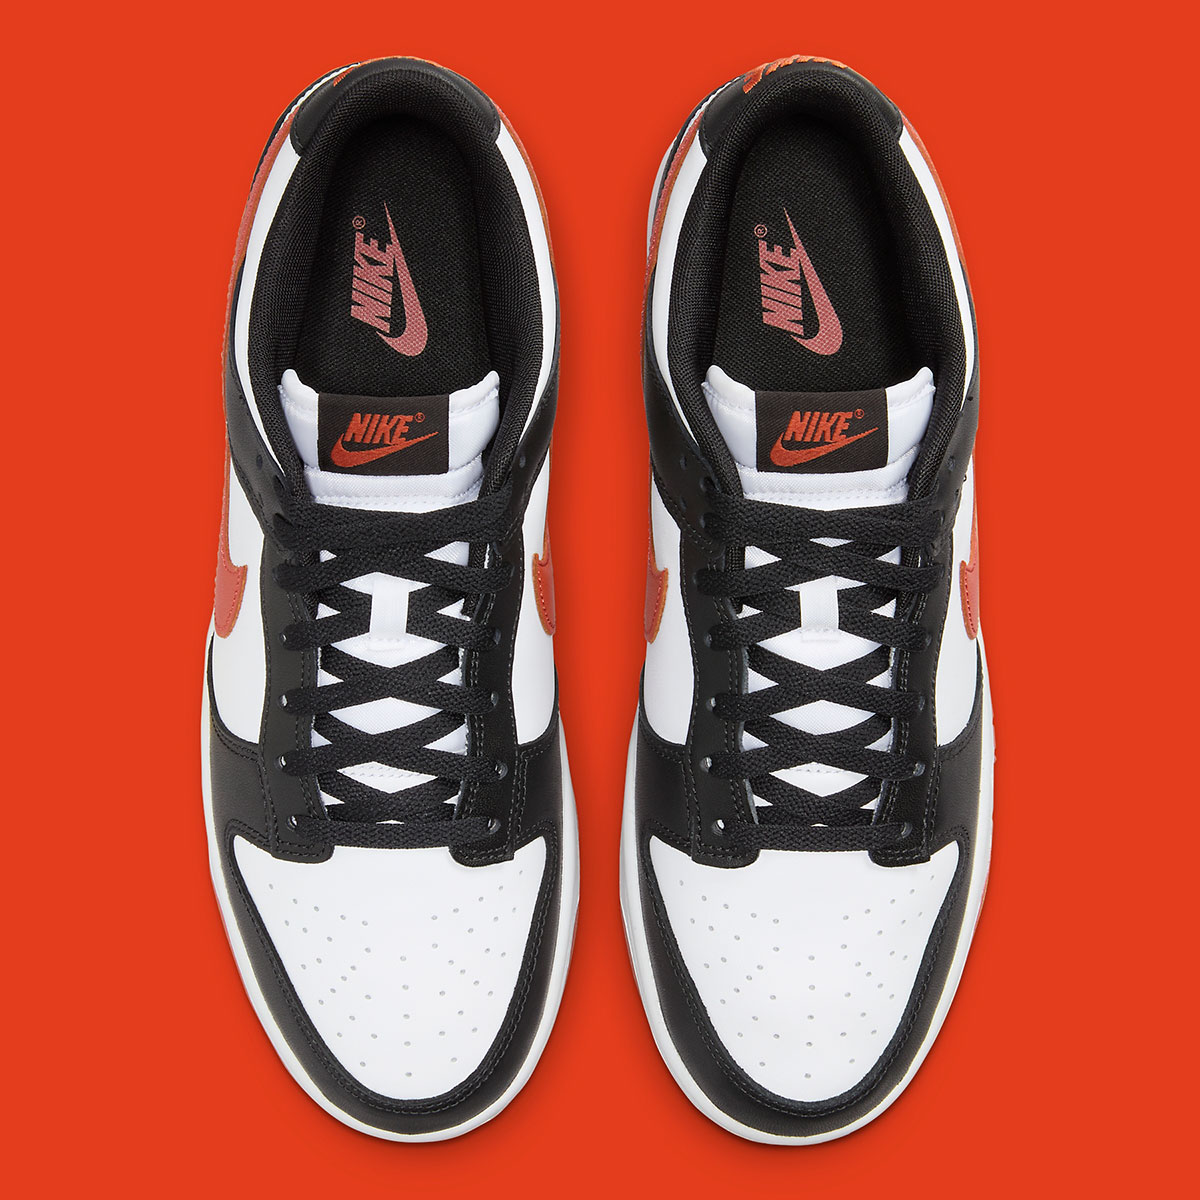 discount nike and jordan clothes store sale shoes White Dragon Red Black Dv0833 108 5